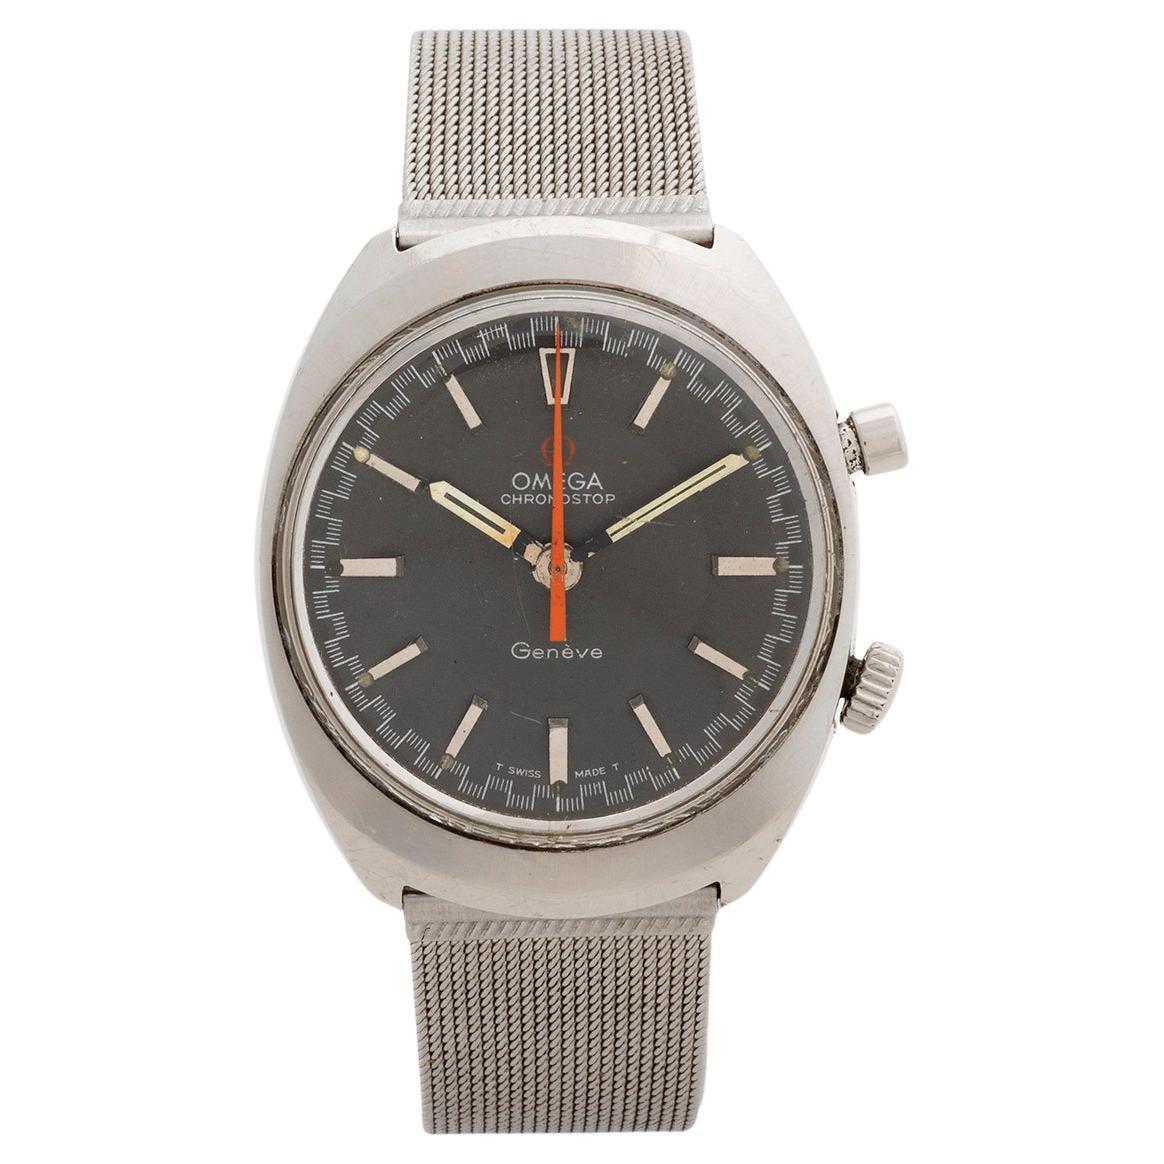 Omega Geneve Chronostop Wristwatch, Patinated Dial/Hands, Circa 1968 For Sale